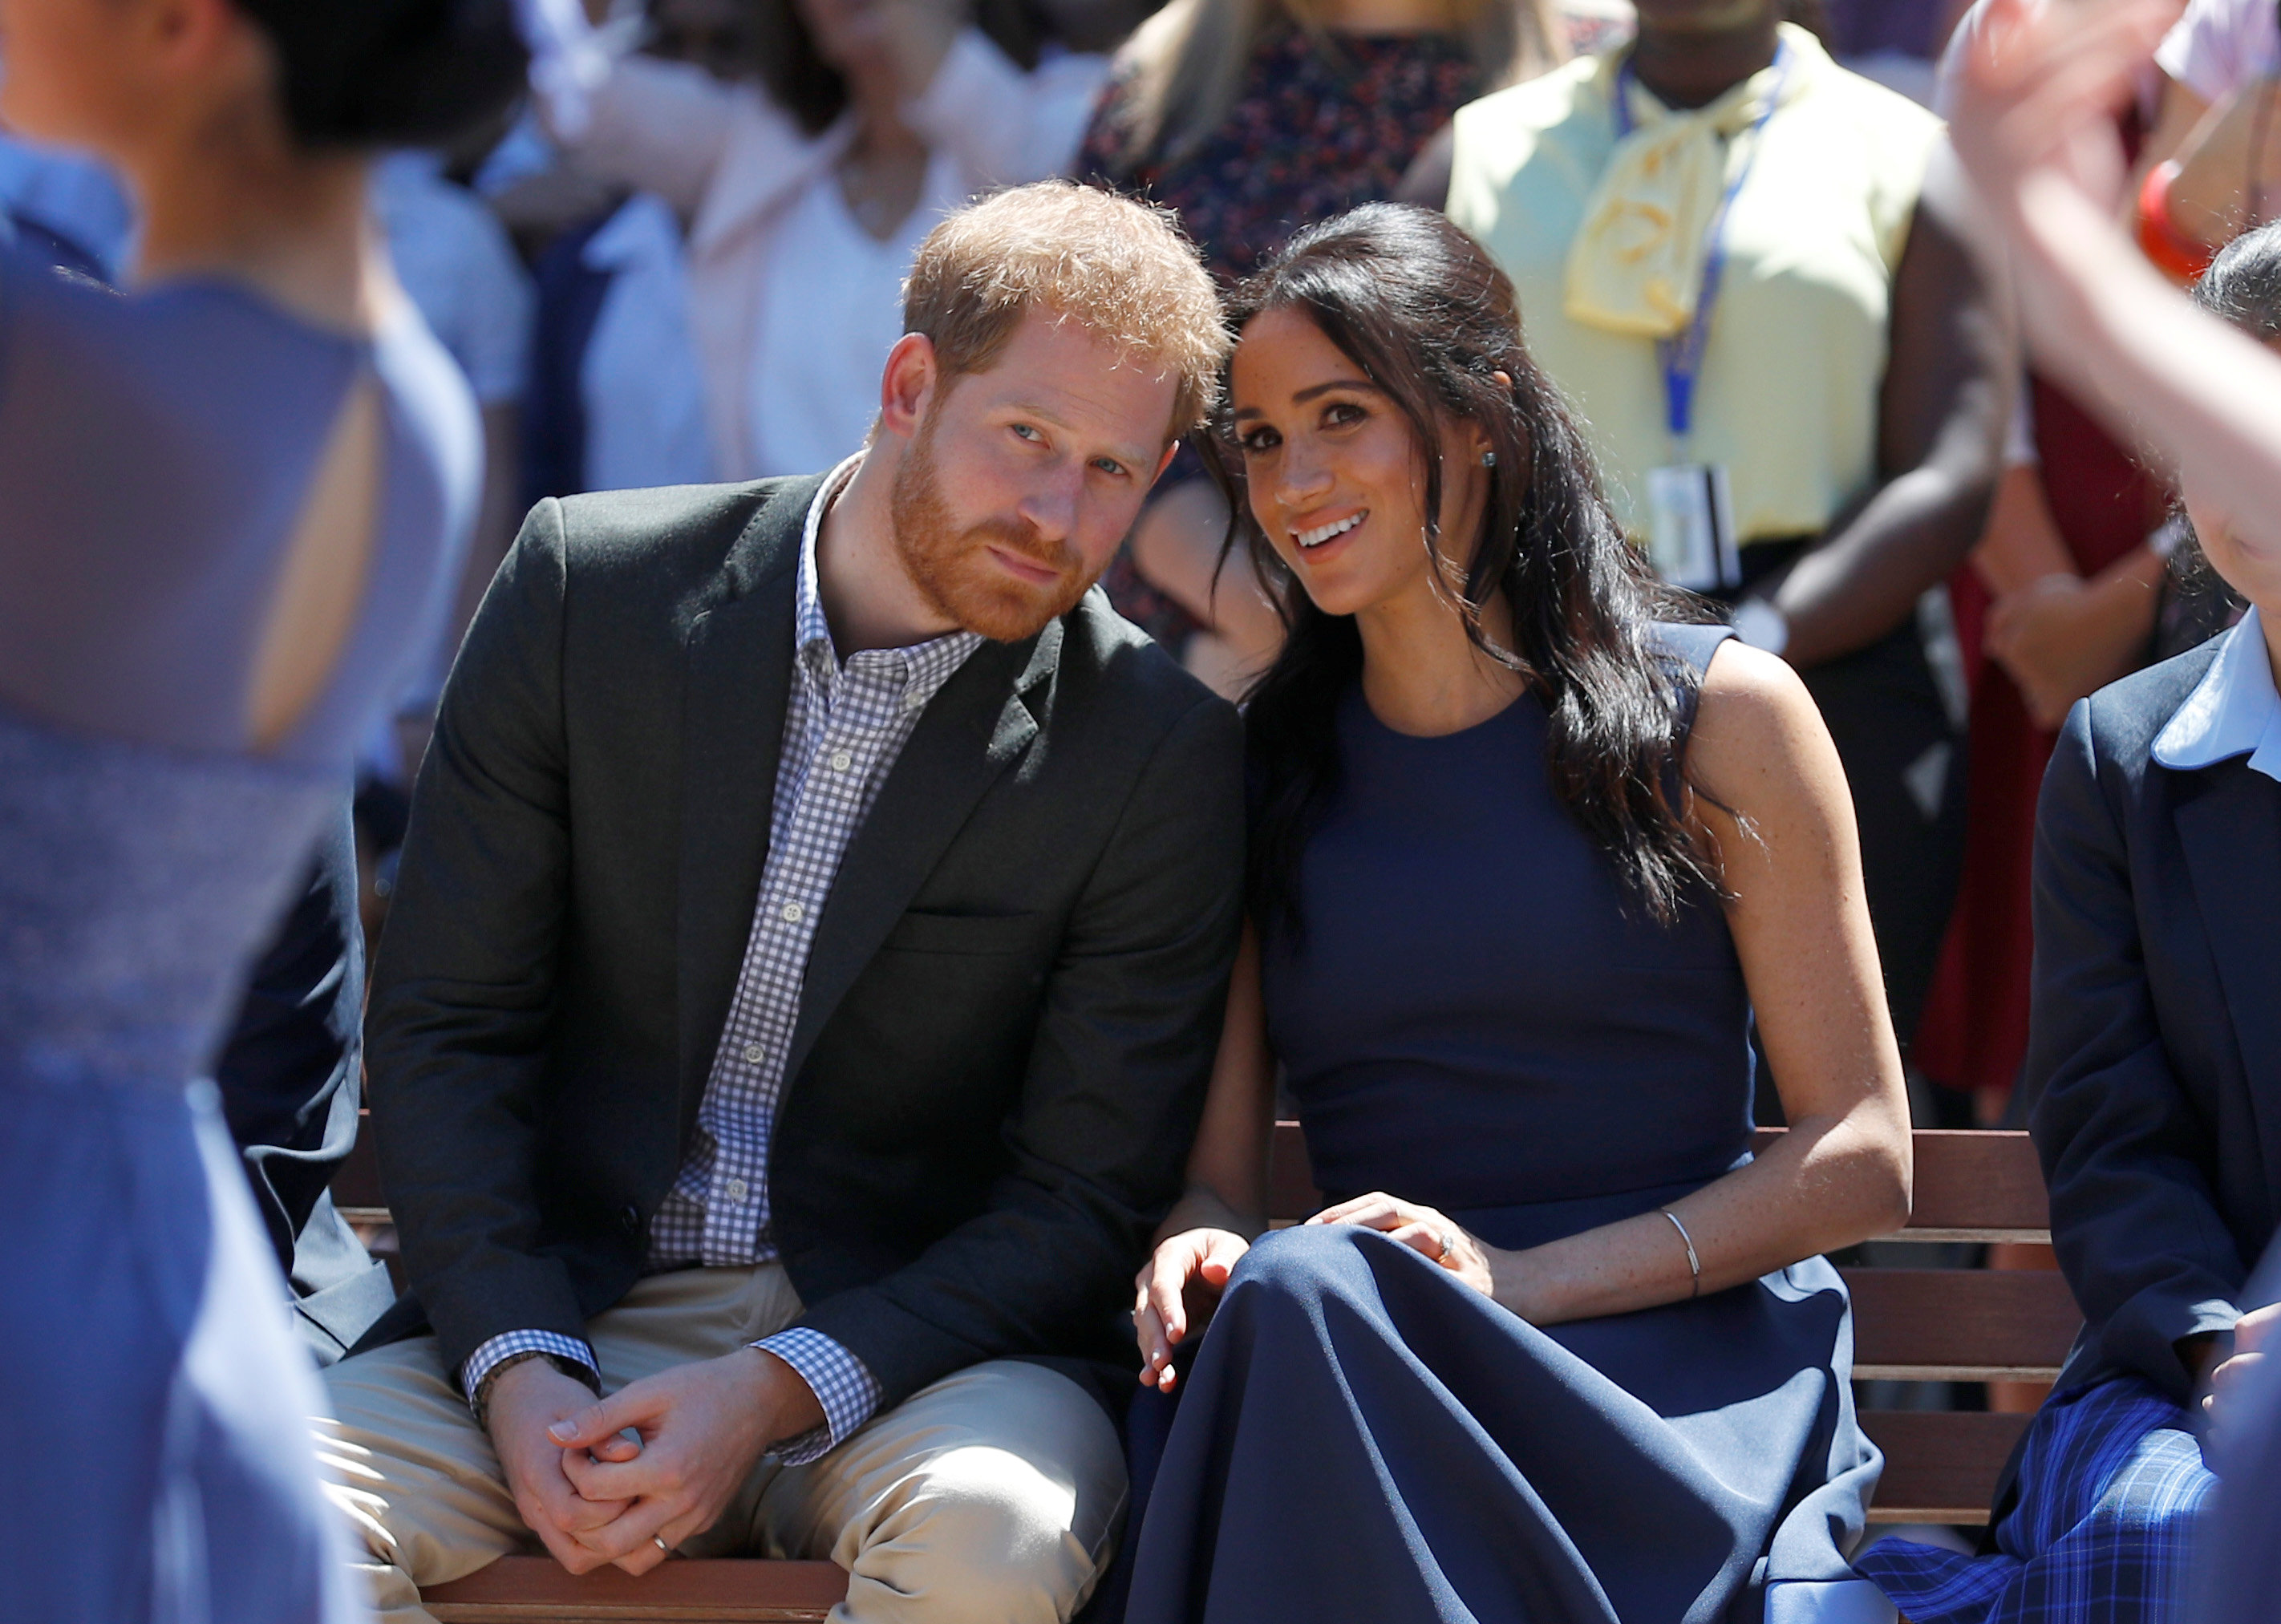 Prince Harry made a sweet reference to Meghan Markle’s pregnancy at Invictus Games